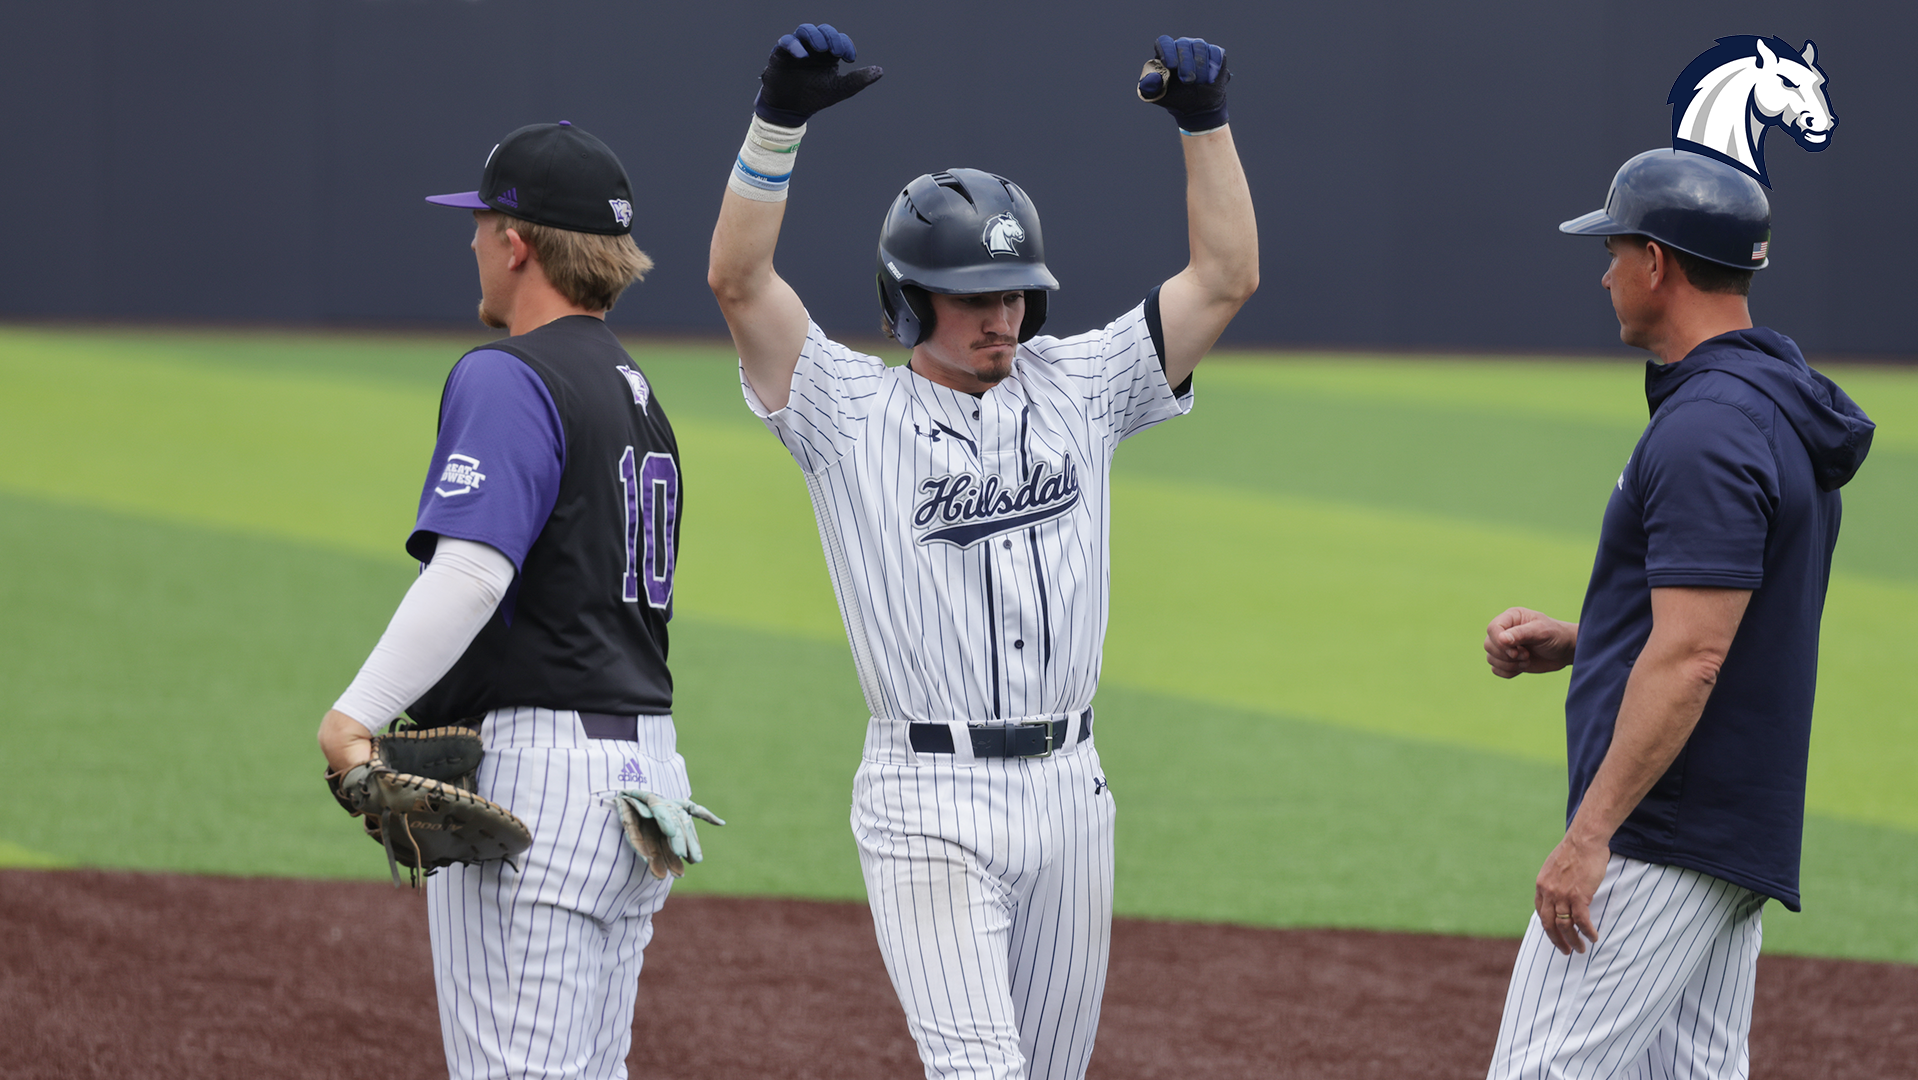 Chargers complete series sweep of Kentucky Wesleyan on Senior Day